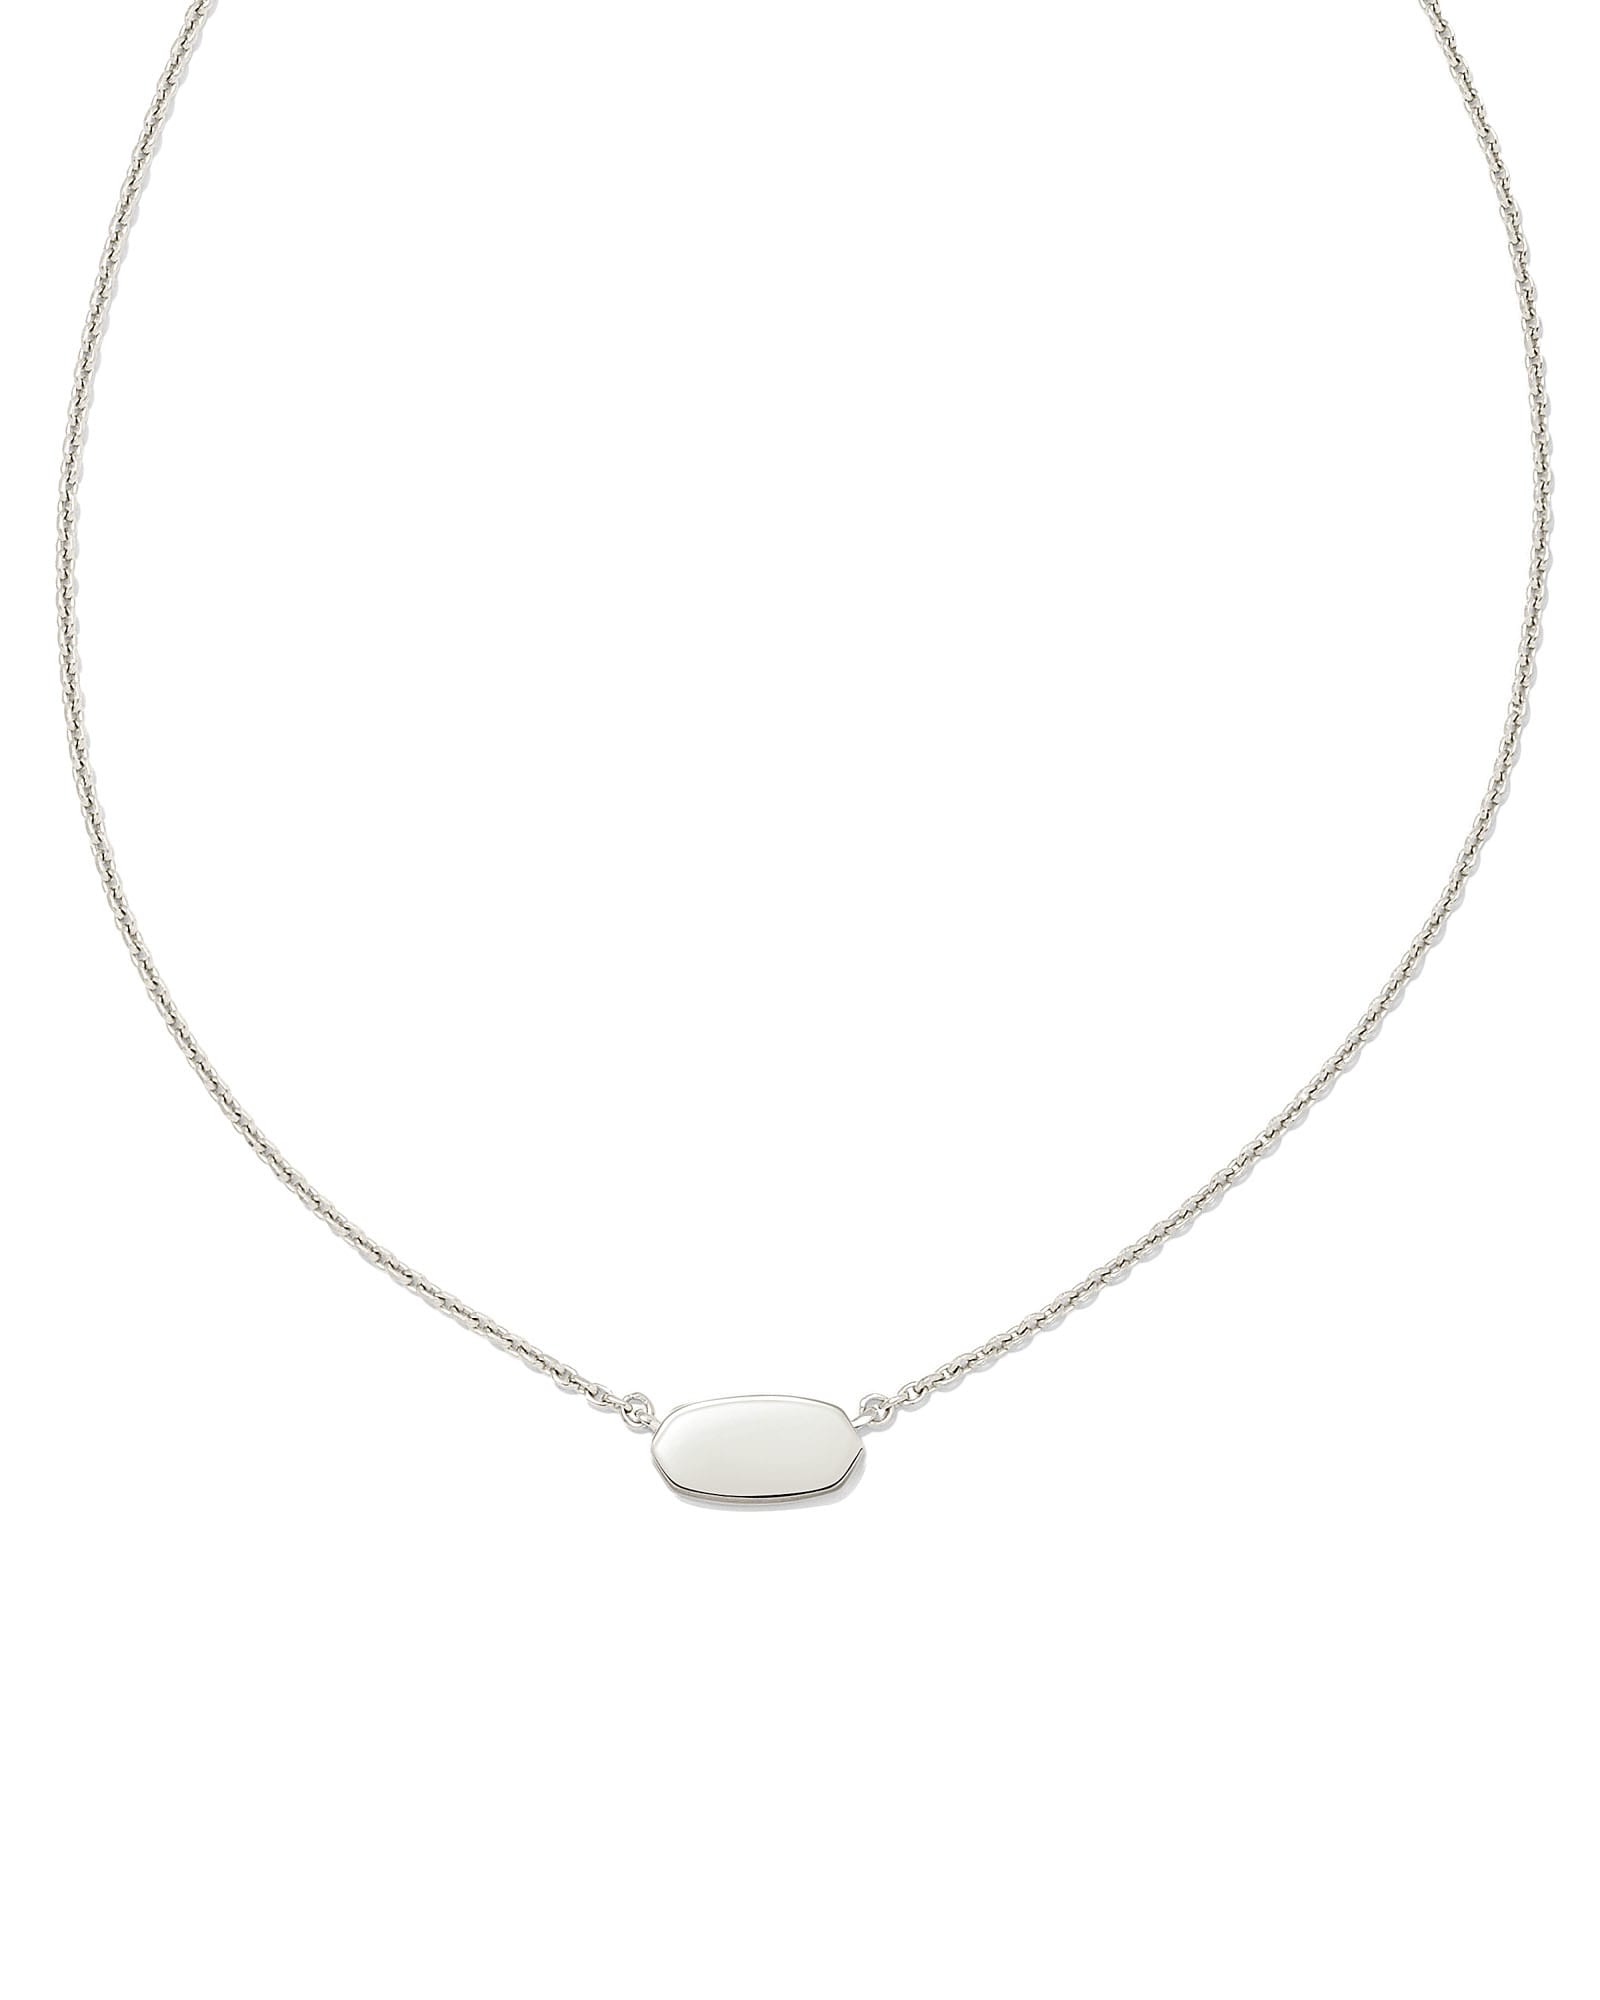 Kendra Scott Mommy & Me Youth Fern Short Pendant Necklace in | Sterling Silver